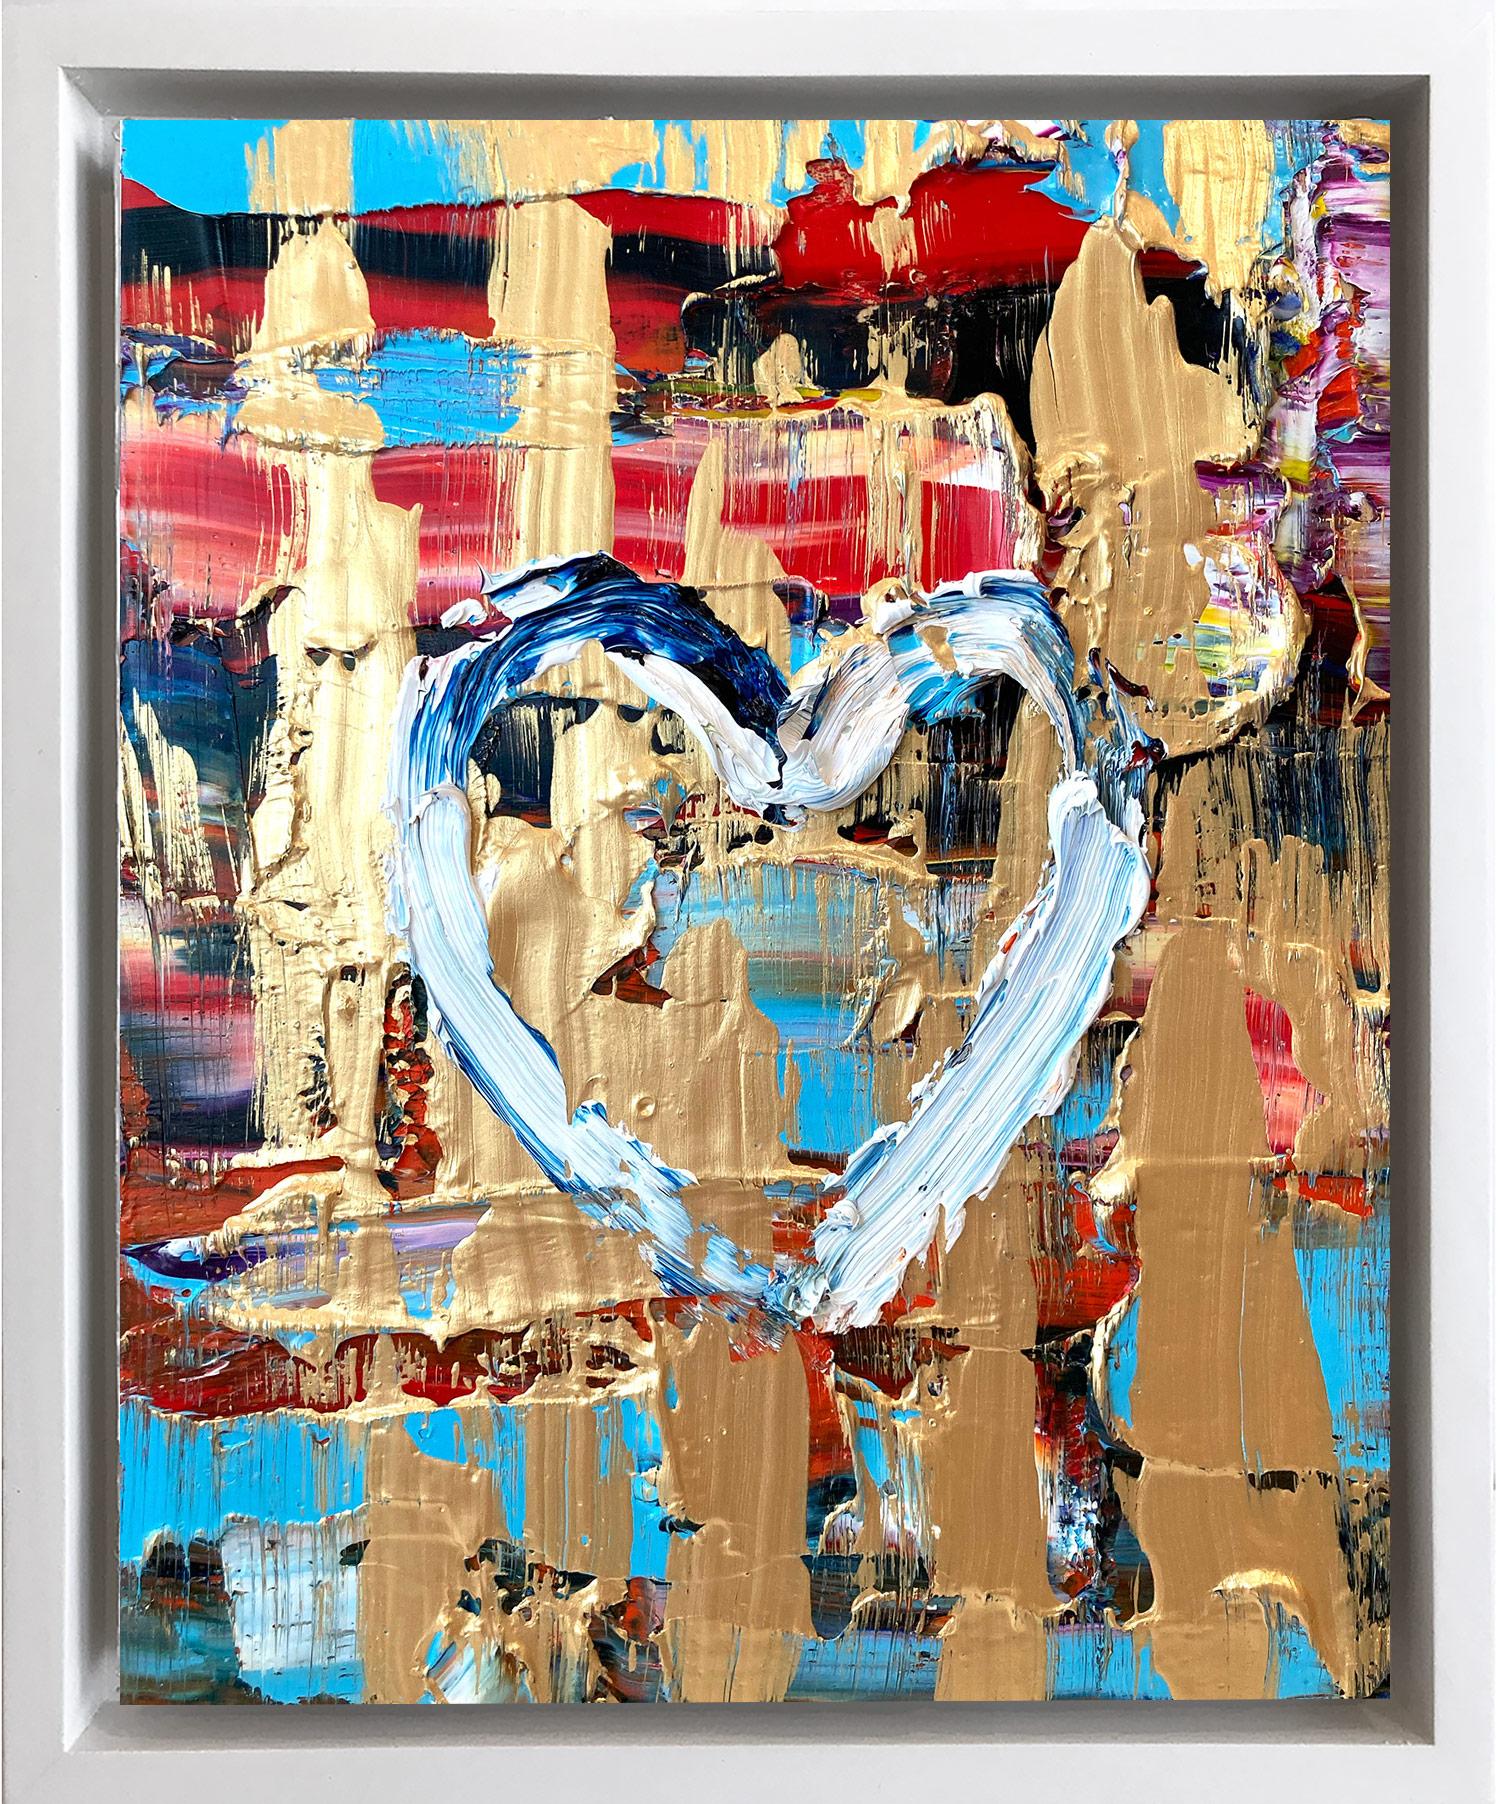 Cindy Shaoul Figurative Painting - "My Cosmopolitan Heart" Contemporary Oil Painting Framed w Floater Frame